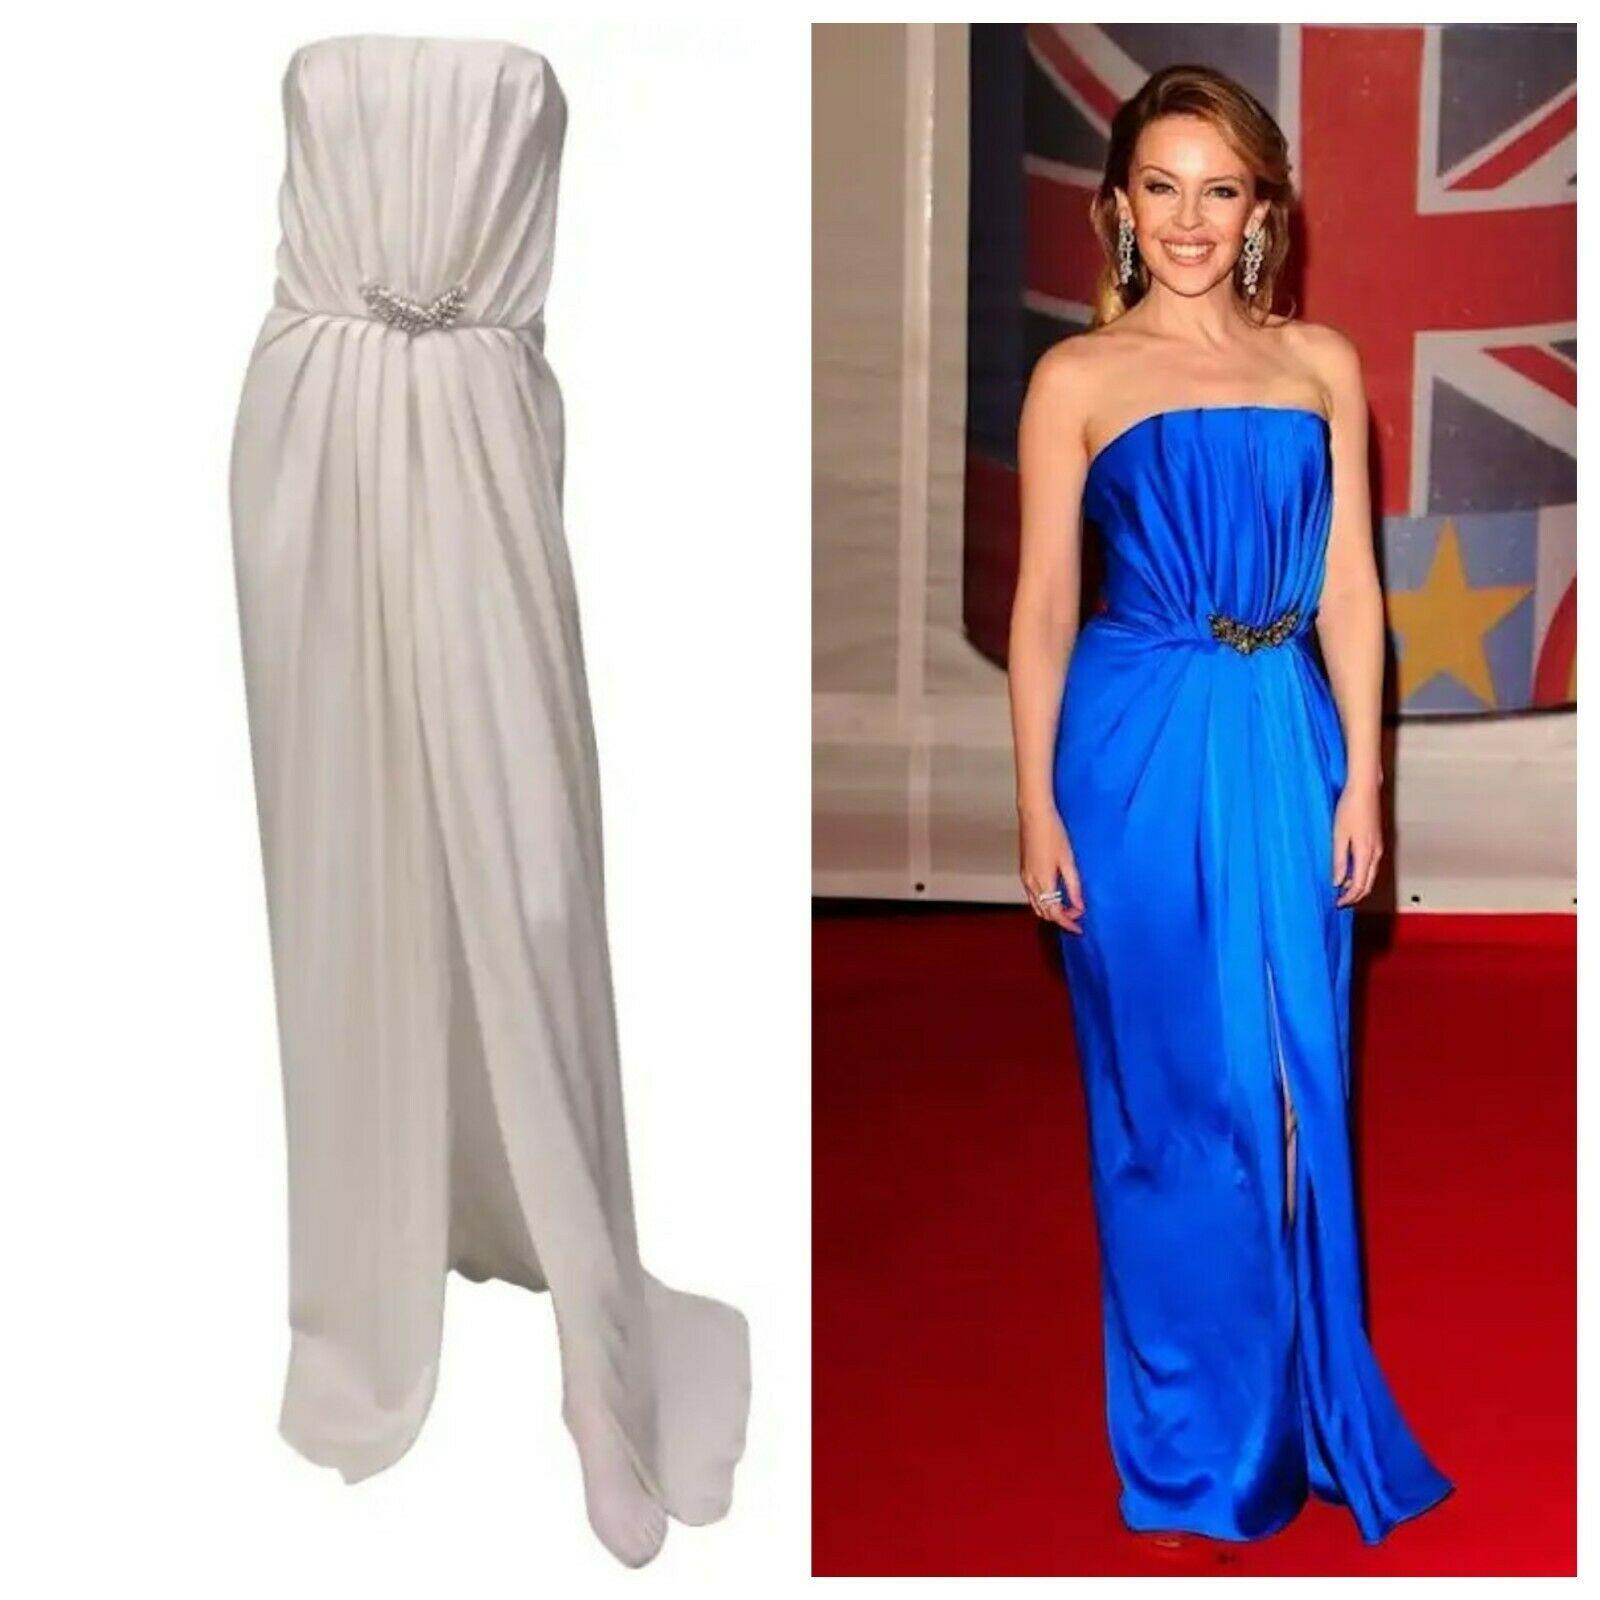 Carla Bruni-Sarkozy looked stunning in this column dress by Saint Laurent.
Kylie Minogue wore the same gown to the BRIT Awards.
Now it's your chance to own this delicate and incredibly elegant creation.
Color: White
100% Silk
Crystal